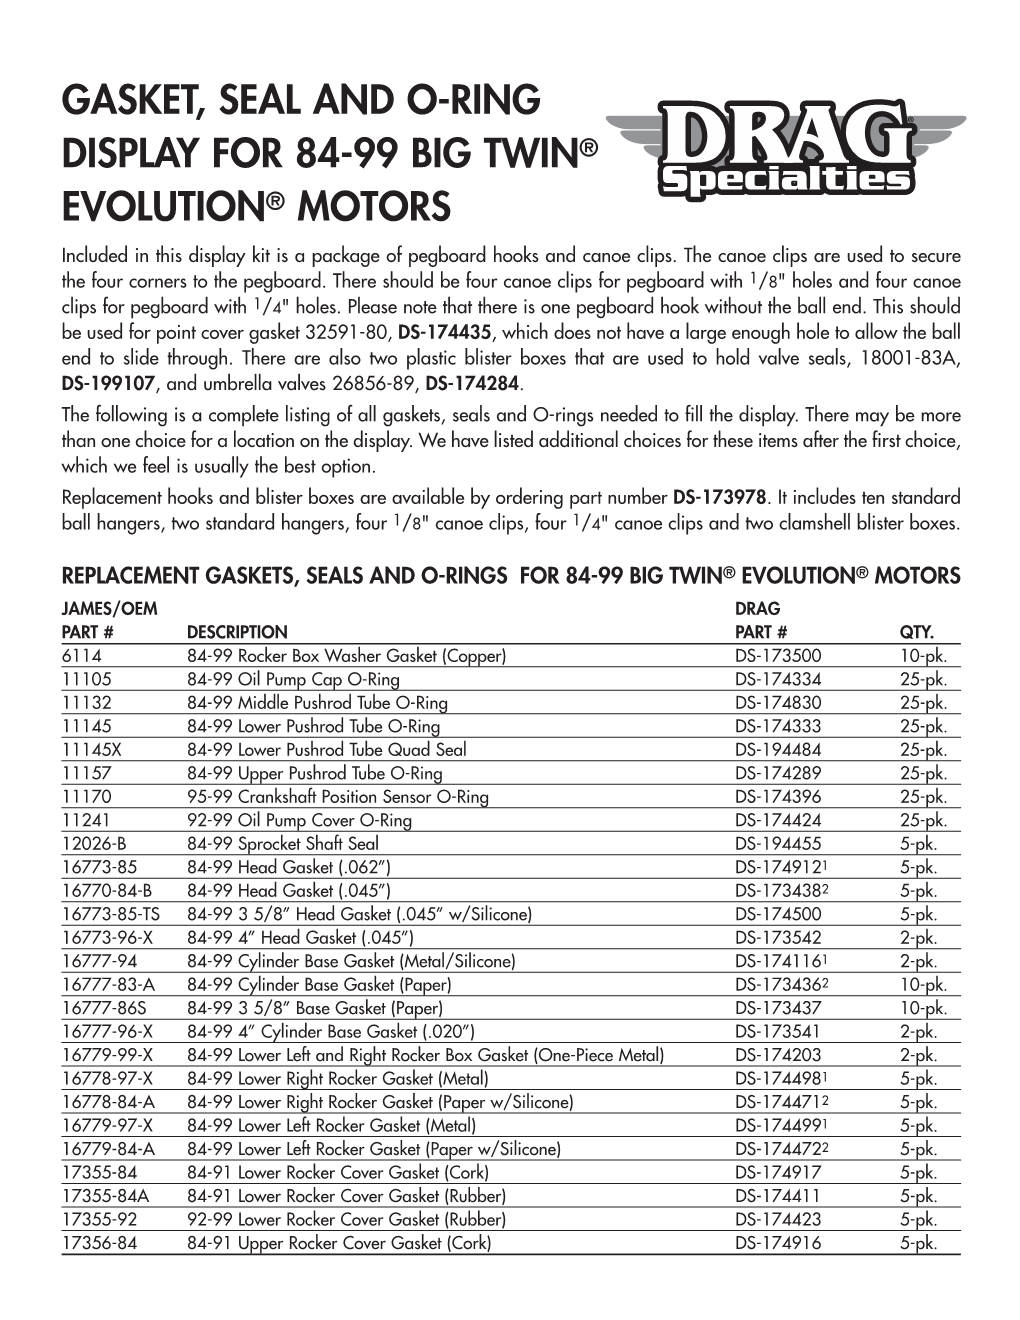 GASKET, SEAL and O-RING DISPLAY for 84-99 BIG TWIN® EVOLUTION® MOTORS Included in This Display Kit Is a Package of Pegboard Hooks and Canoe Clips